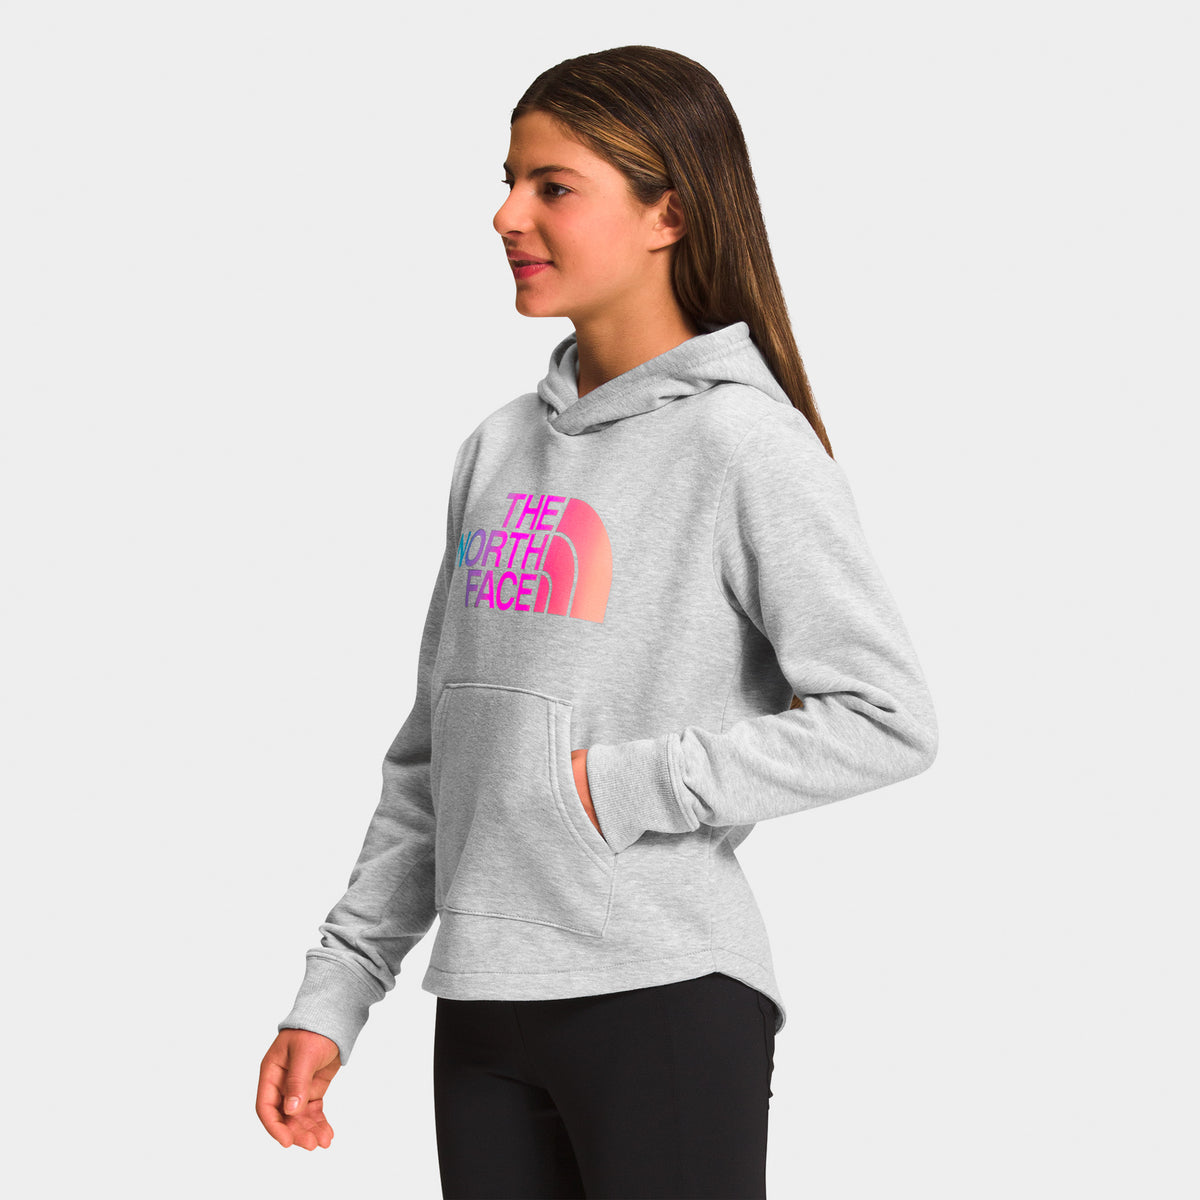 The North Face Junior Girls' Camp Fleece Pullover Hoodie Light